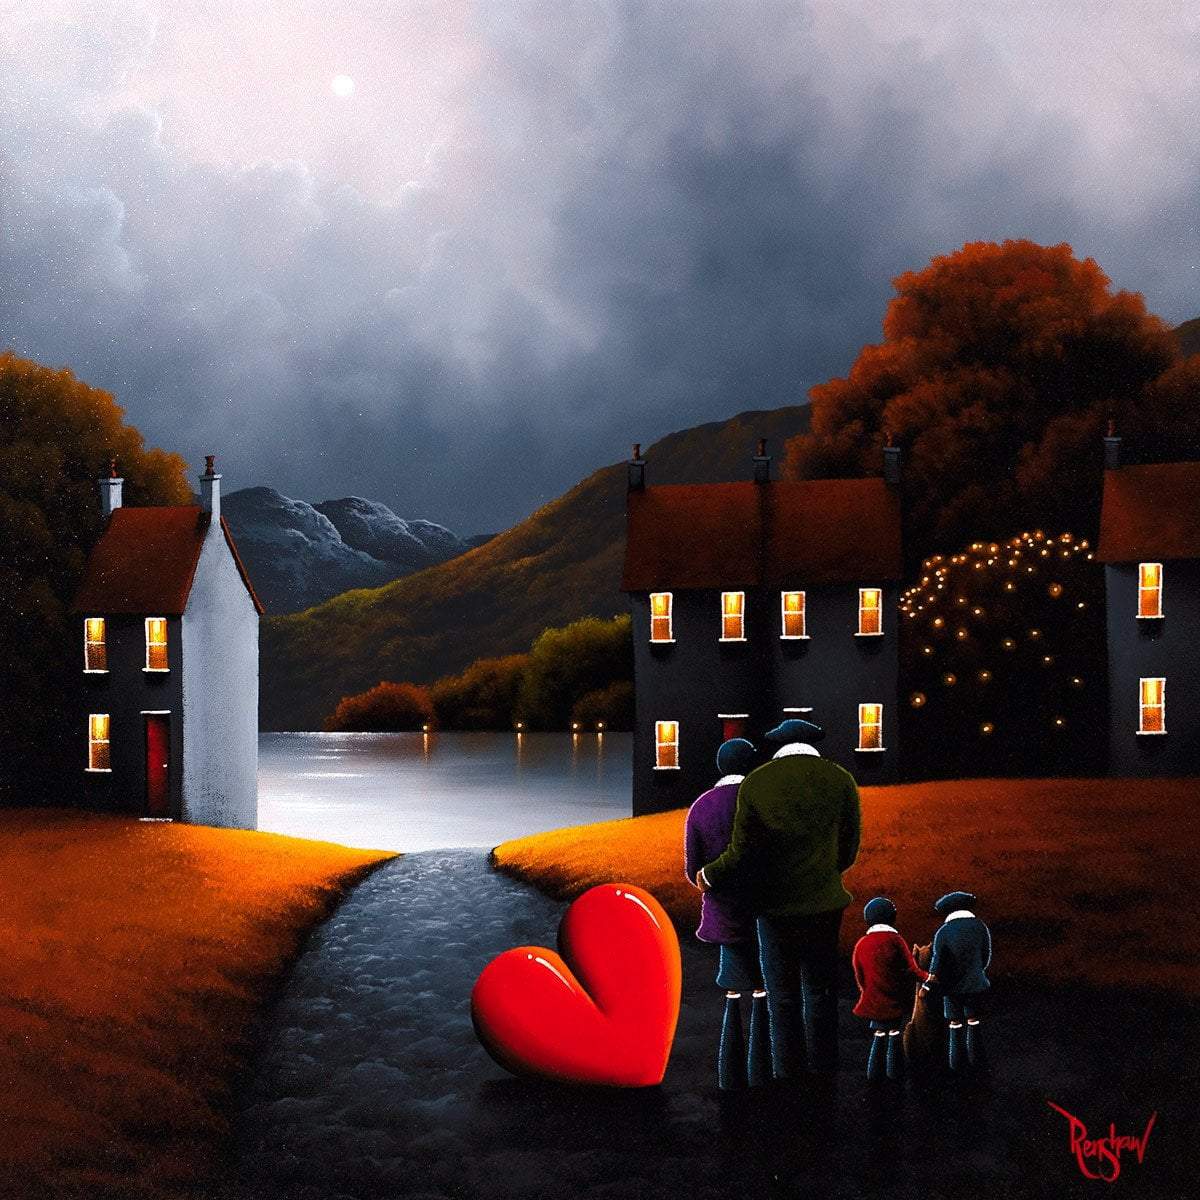 The Way Home - Orignal - SOLD